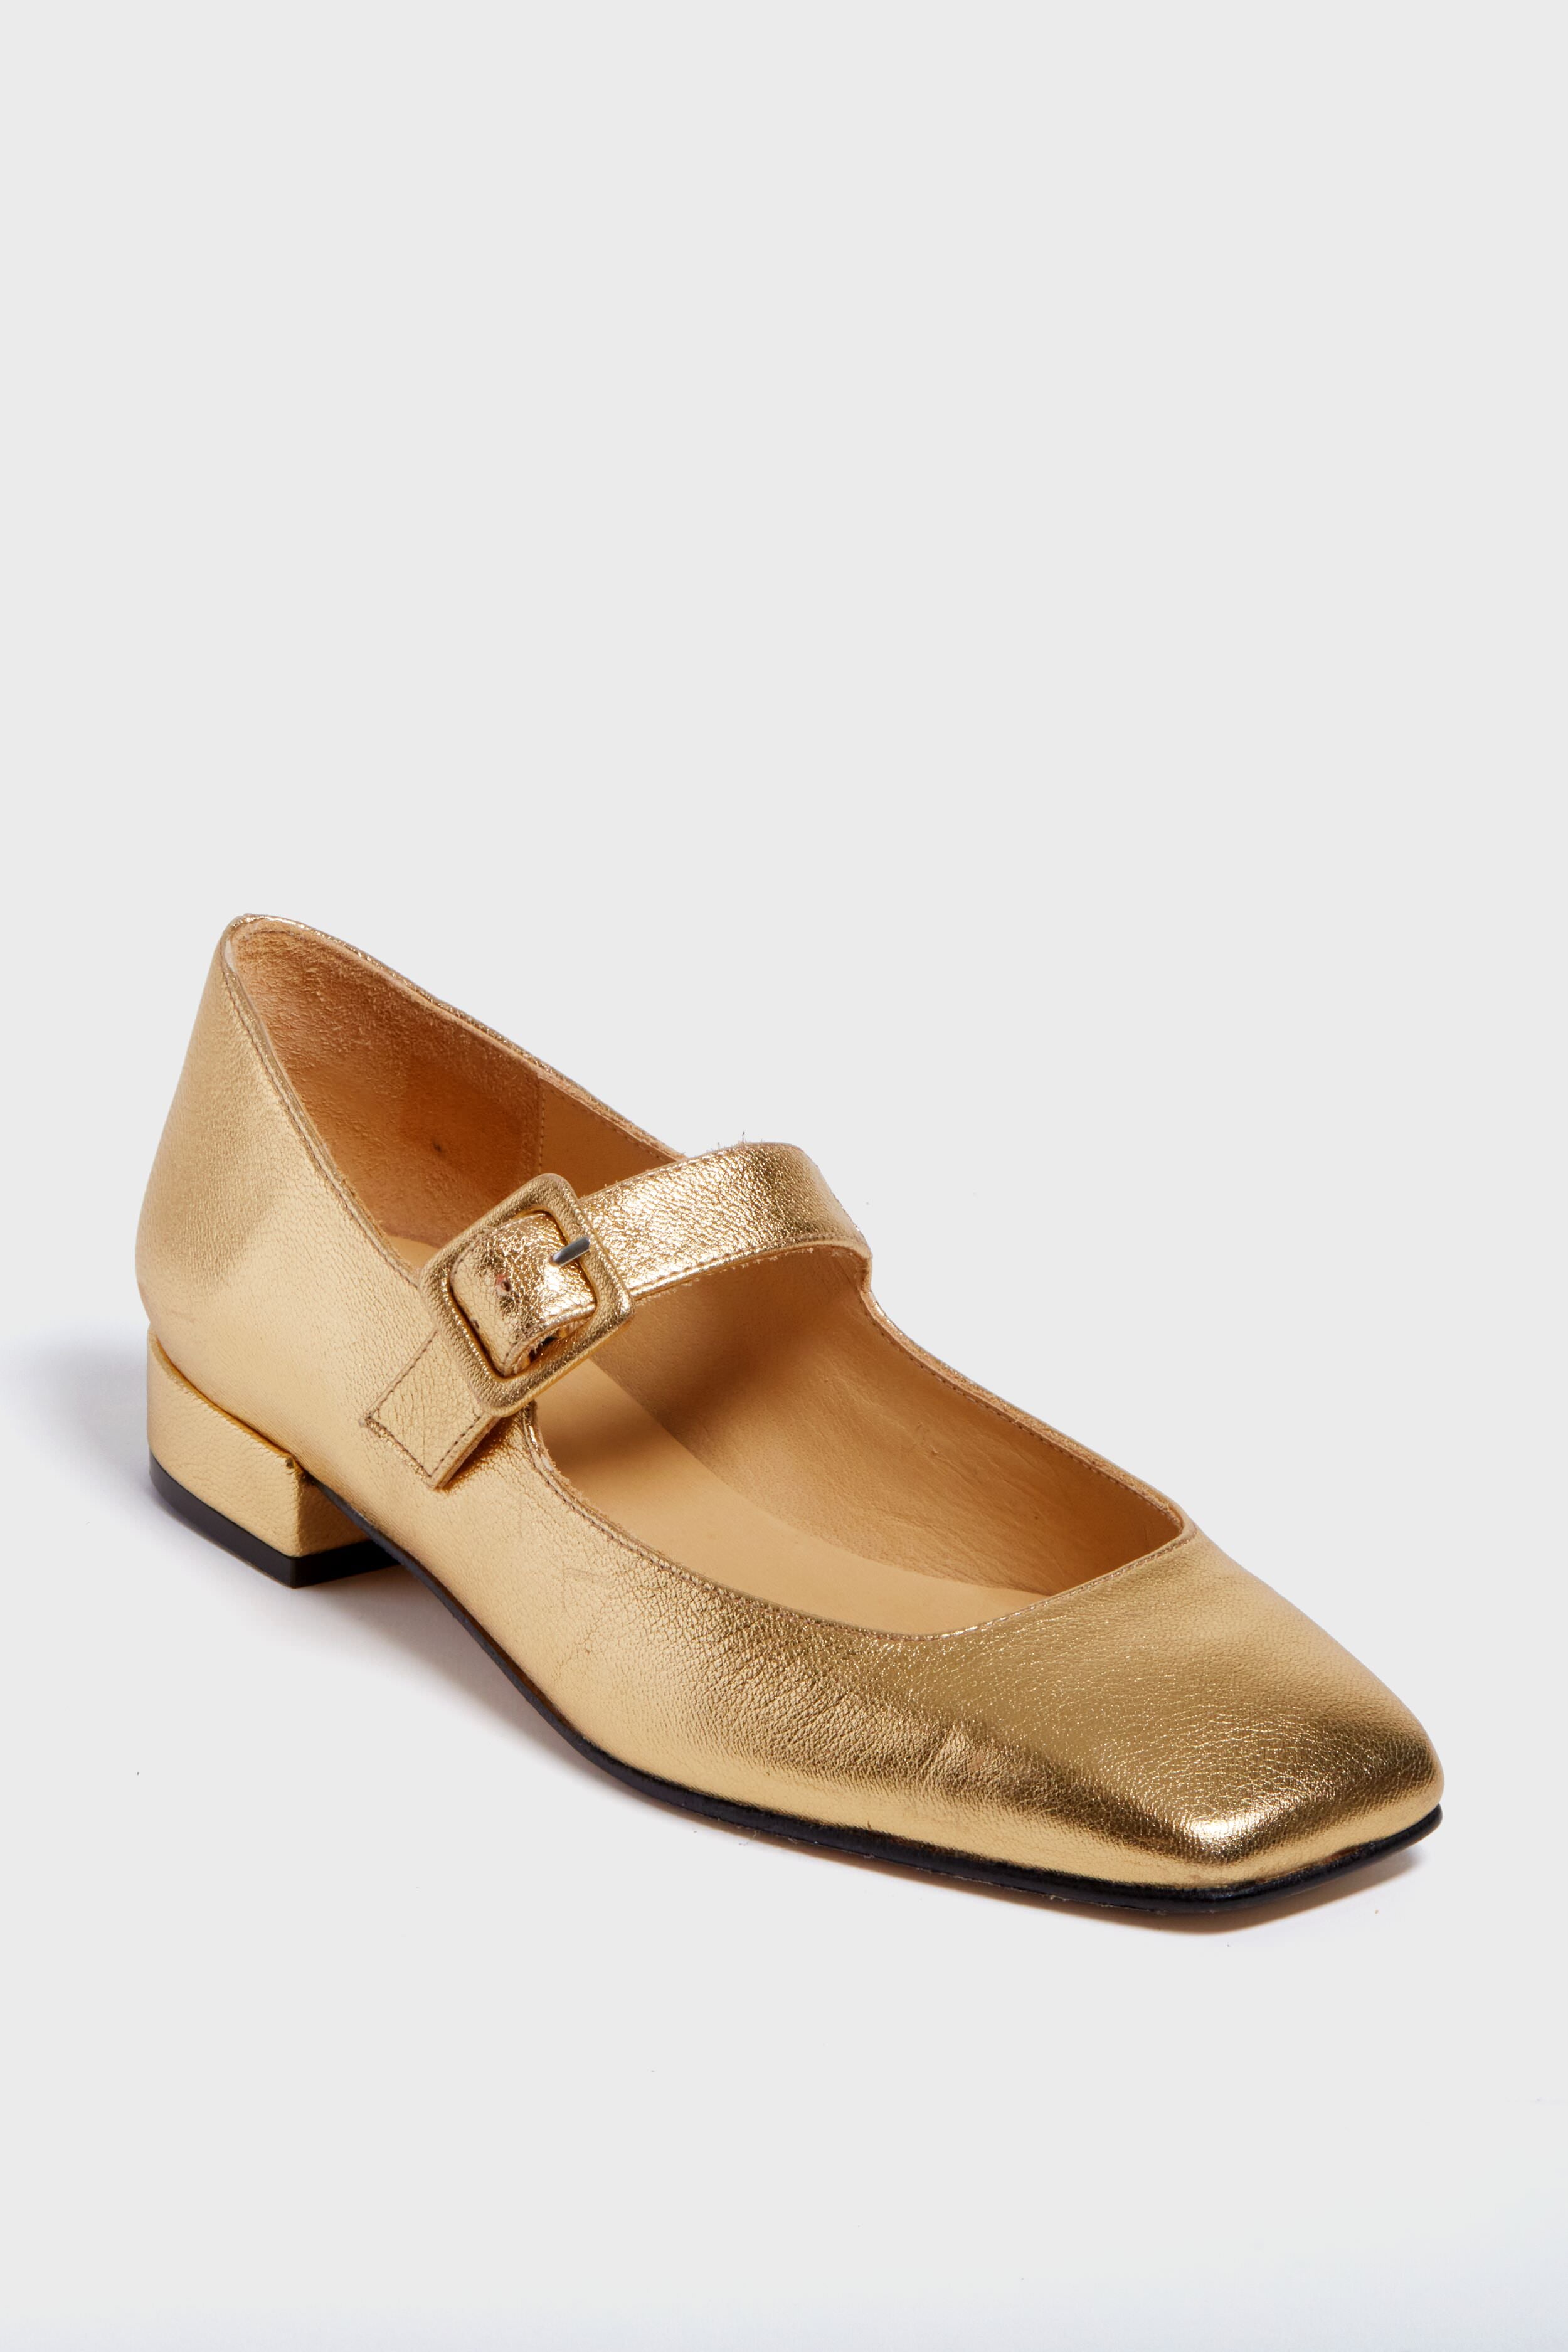 Gold Leather Low Mary Janes | Penelope Chilvers